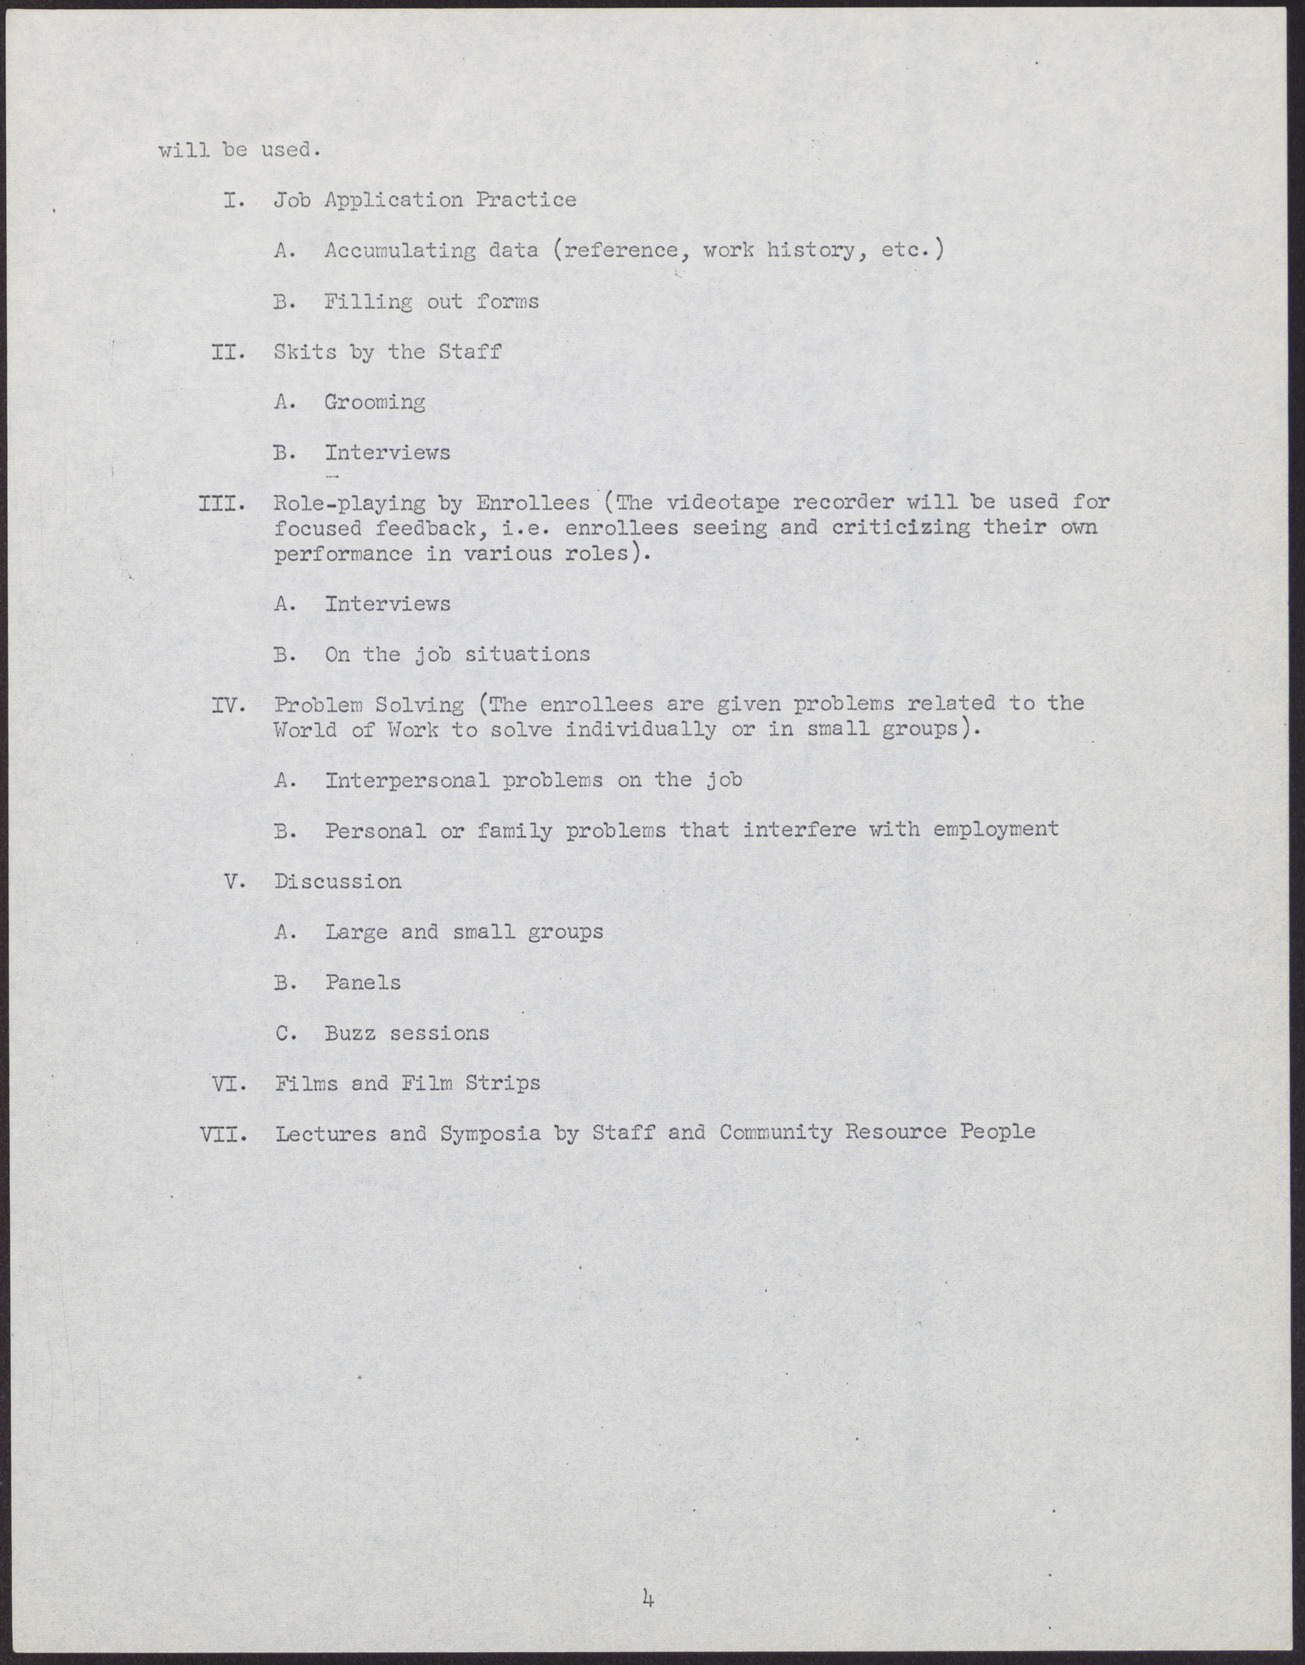 Proposal to the Clark County, Nevada Concentrated Employment Program (21 pages, missing some pages/sections listed in its table of contents), July 2, 1968, page 8